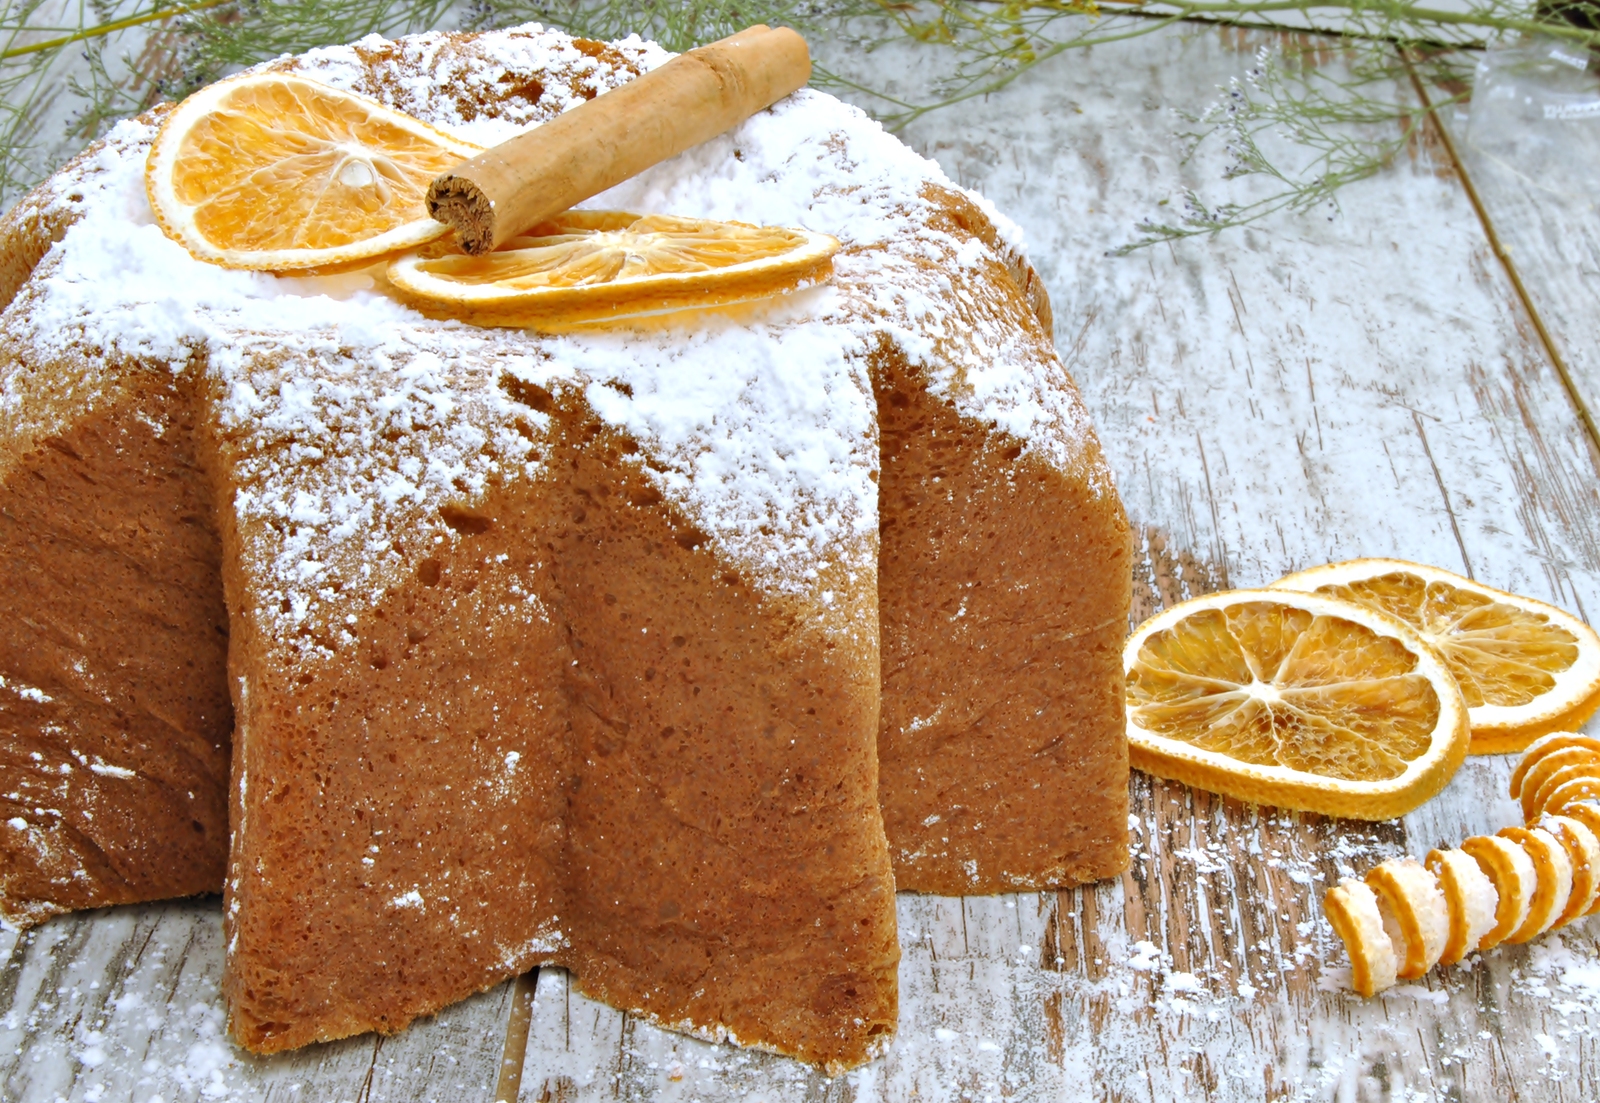 Panneton decorated with orange slices and cinnamon, with sugar on top, rustic background